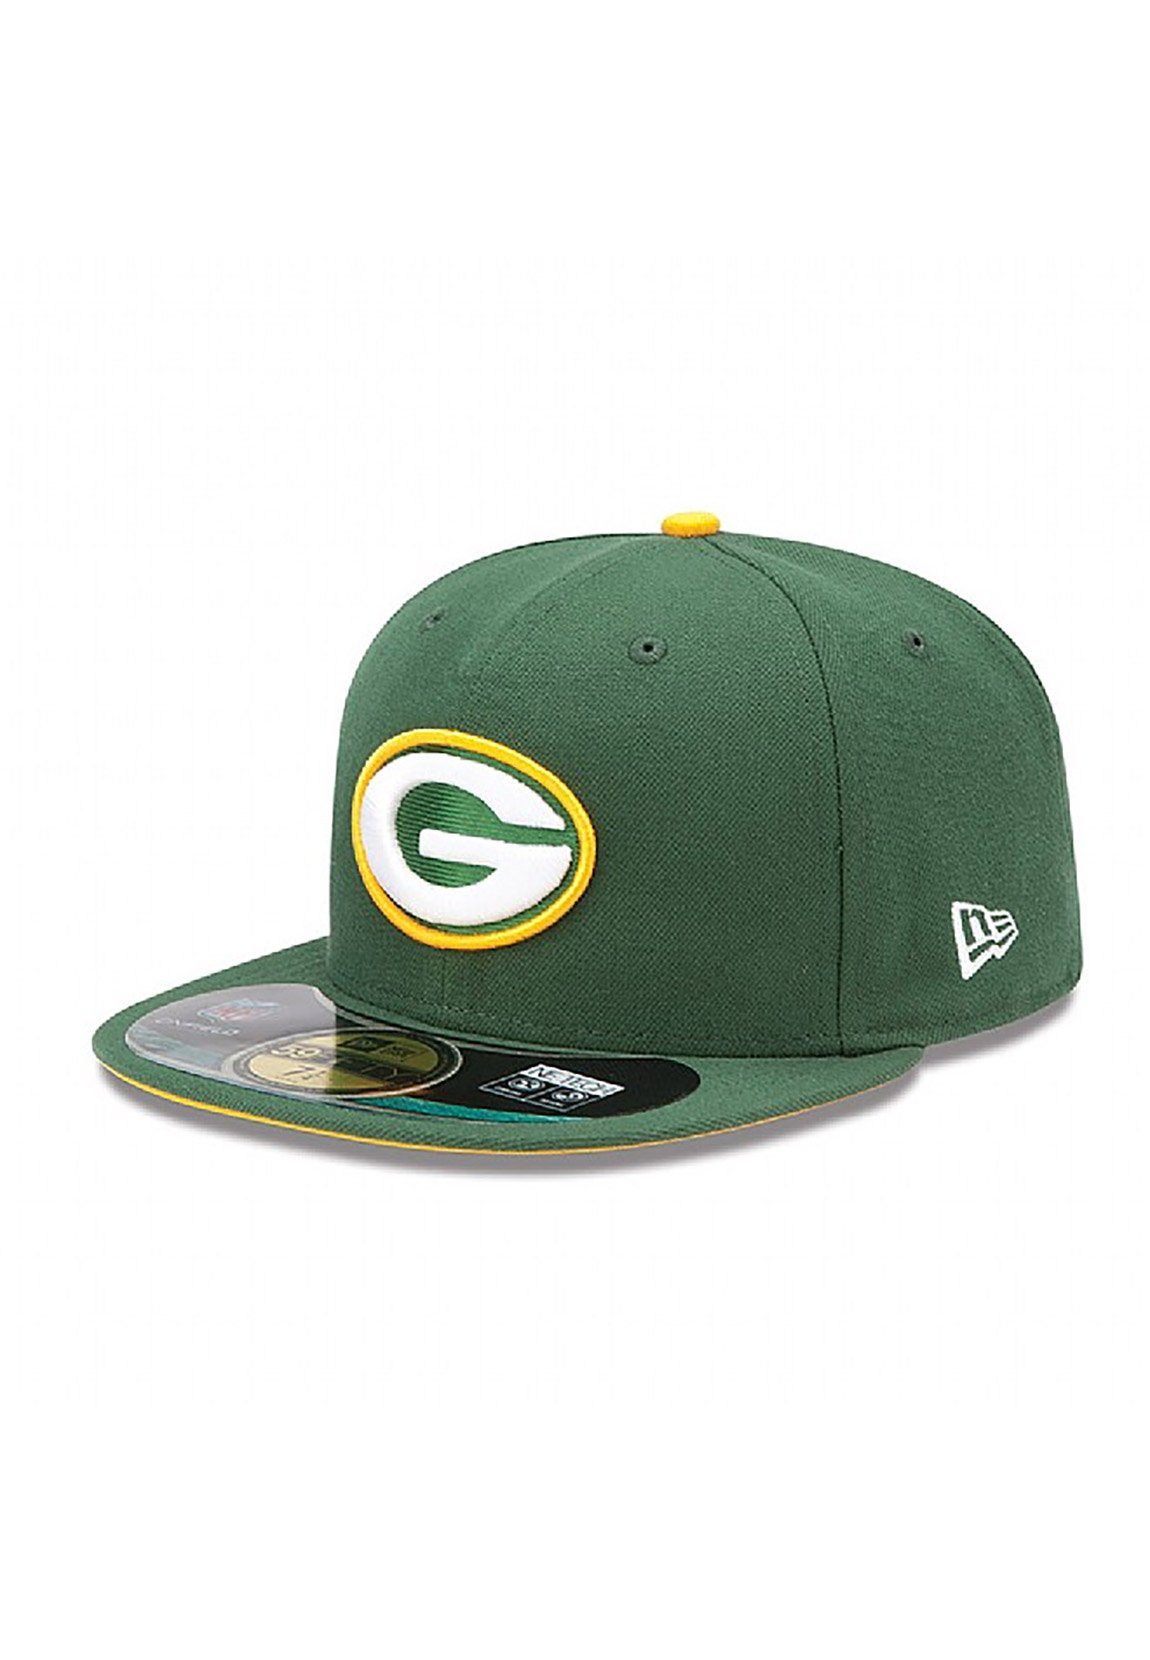 New Era Fitted Cap GREEN Field New Cap BAY Green Era - - NFL PACKERS On